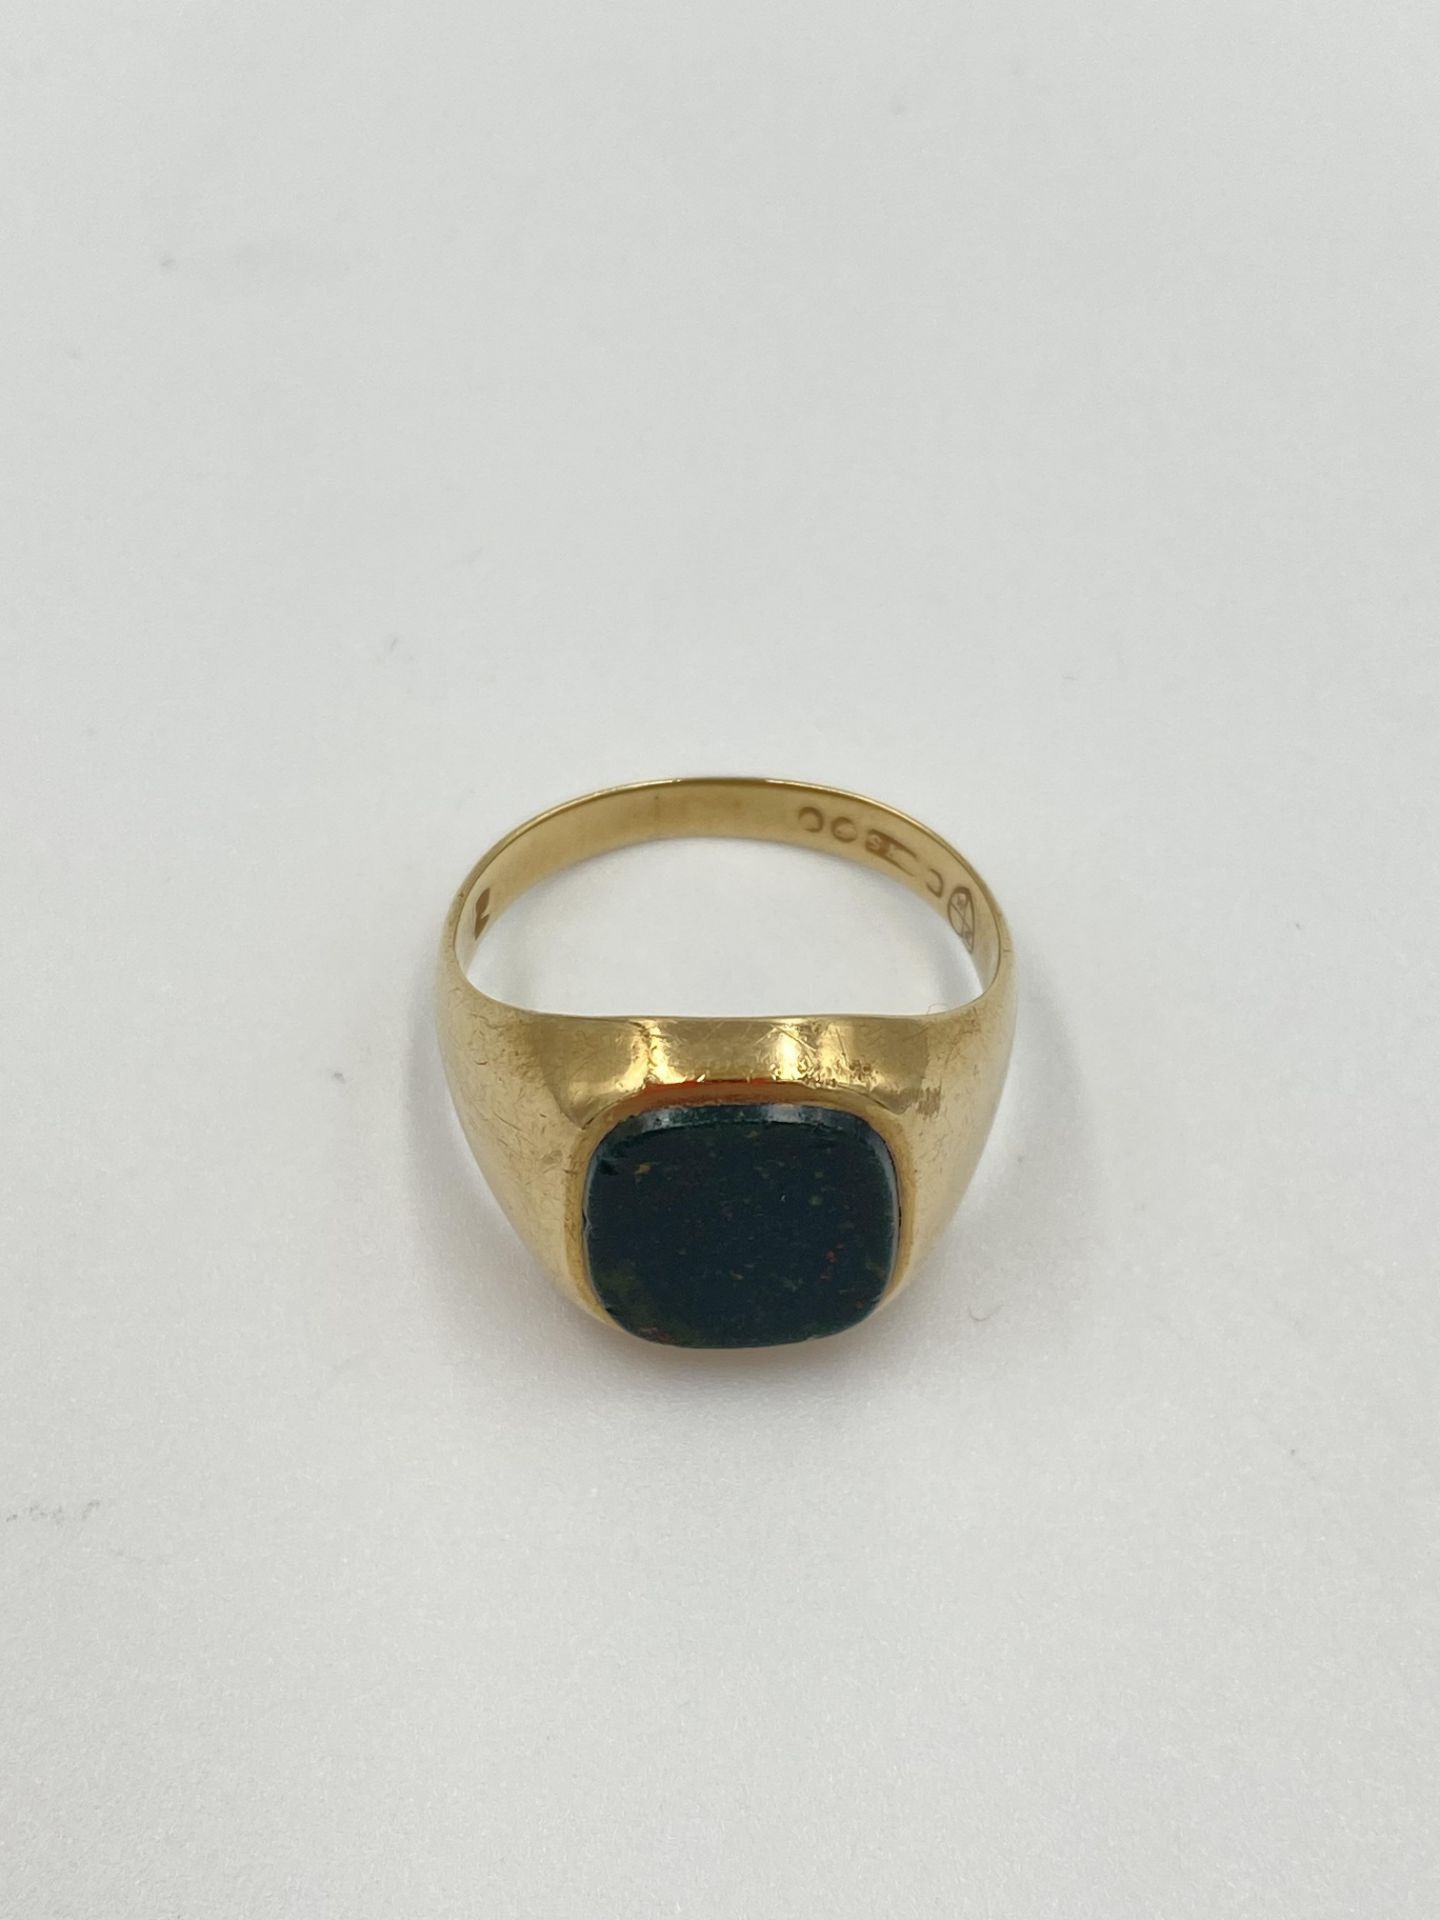 9ct gold and agate ring - Image 2 of 5